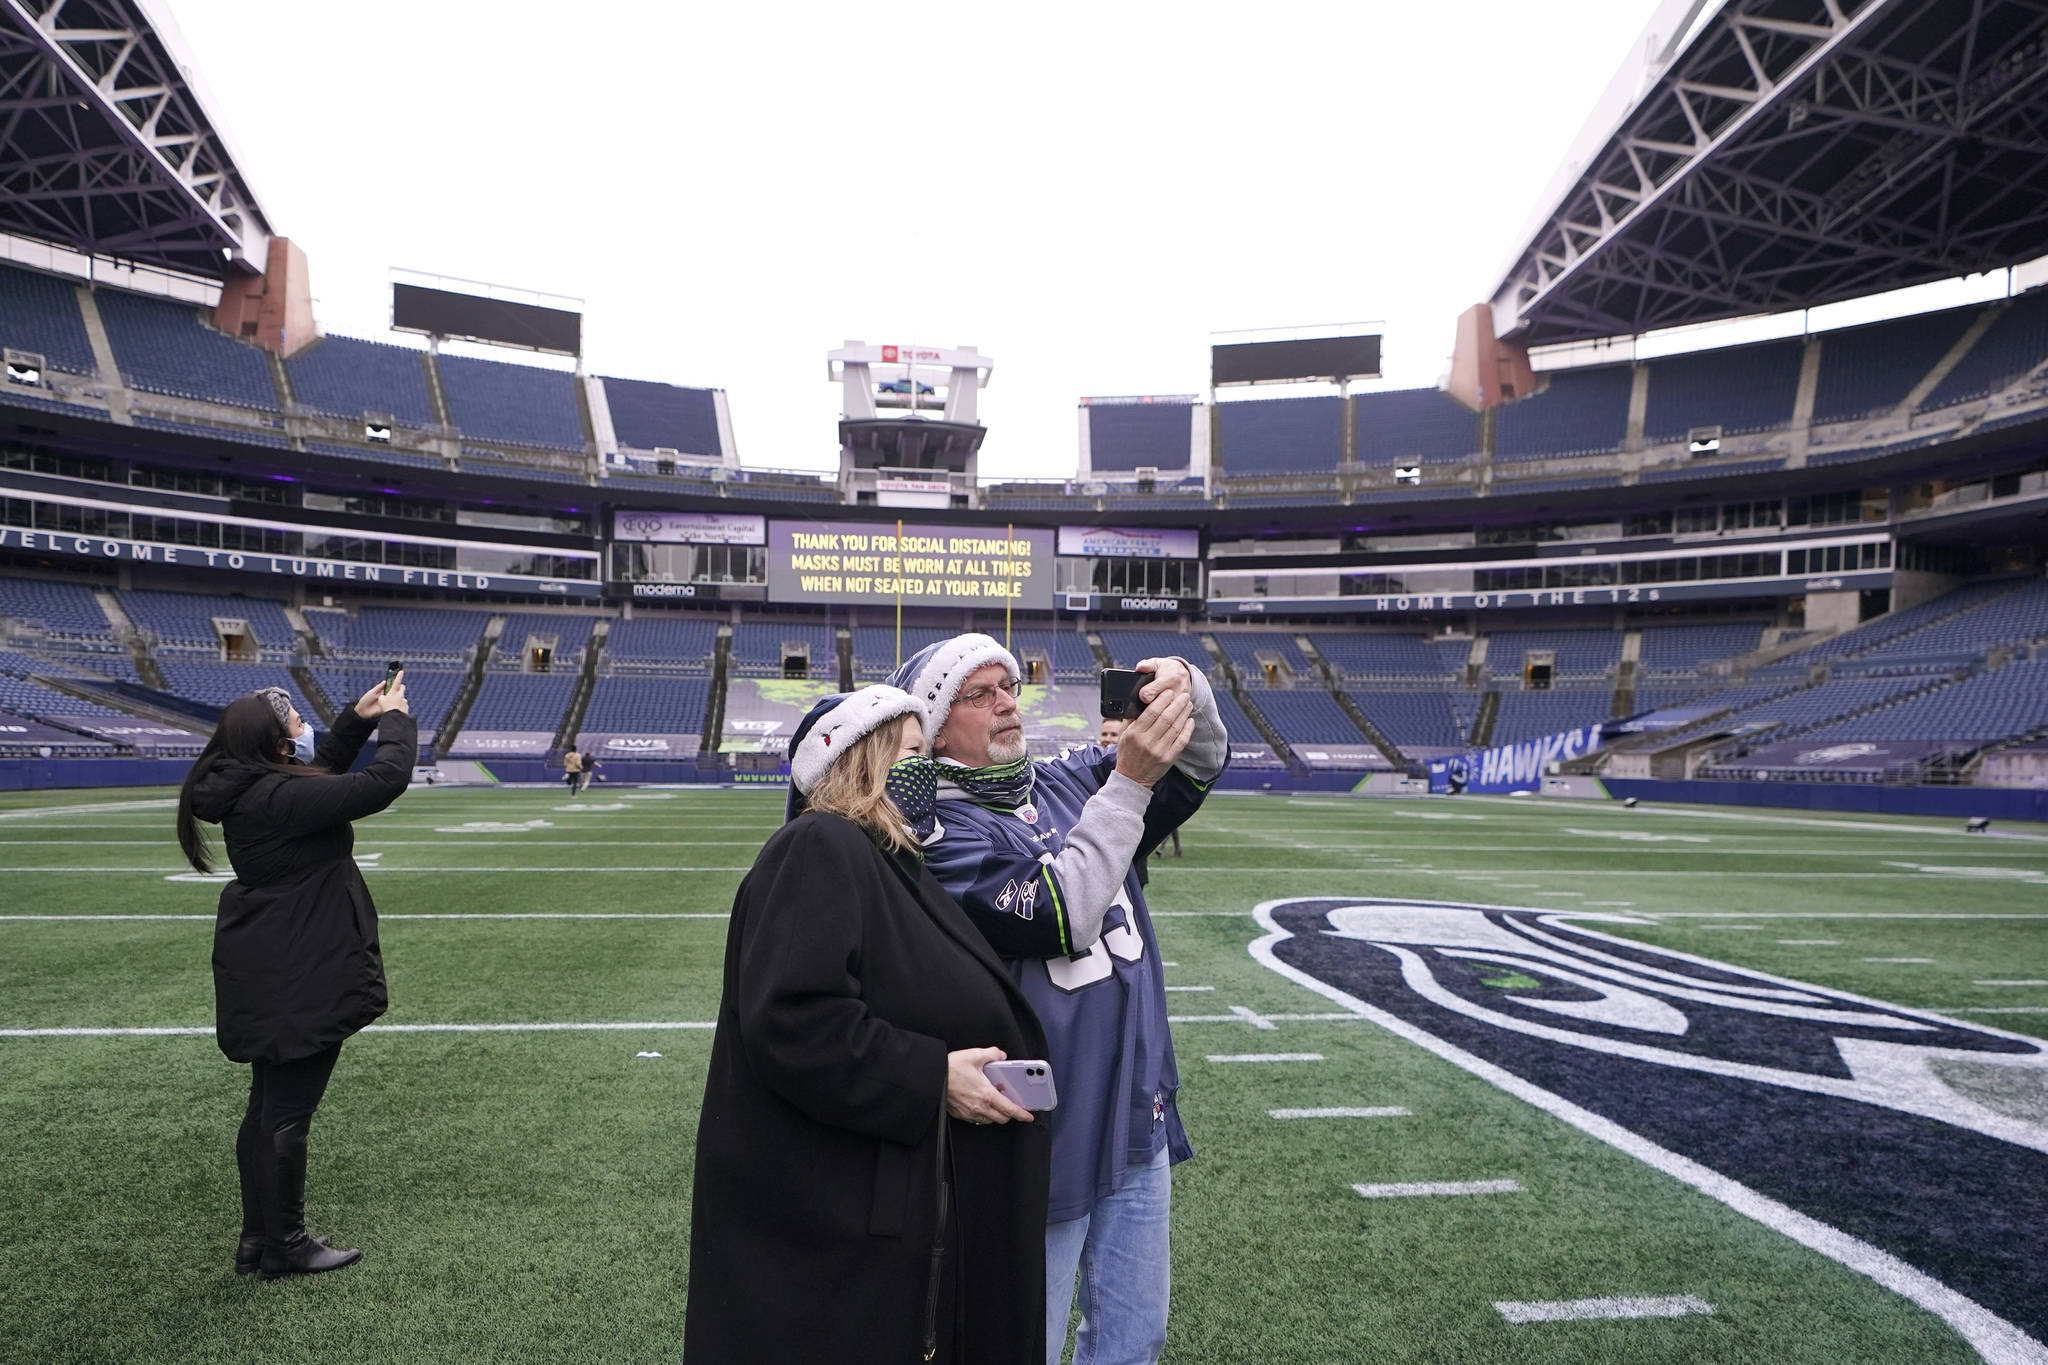 Tom Gallagher, right, wears a Seattle Seahawks jersey and holiday hat as he takes a photo with his wife Debbie on the turf at Lumen Field, Thursday, Feb. 18, 2021, in Seattle. The couple, who are Seattle Seahawks season ticket holders, were celebrating their 45th anniversary by taking part in the "Field To Table" event at the Seahawks' home stadium on the first night of several weeks of dates that offer four-course meals cooked by local chefs and served at socially distanced tables in an open-sided tent on the field as a precaution against the COVID-19 pandemic. (AP Photo/Ted S. Warren)